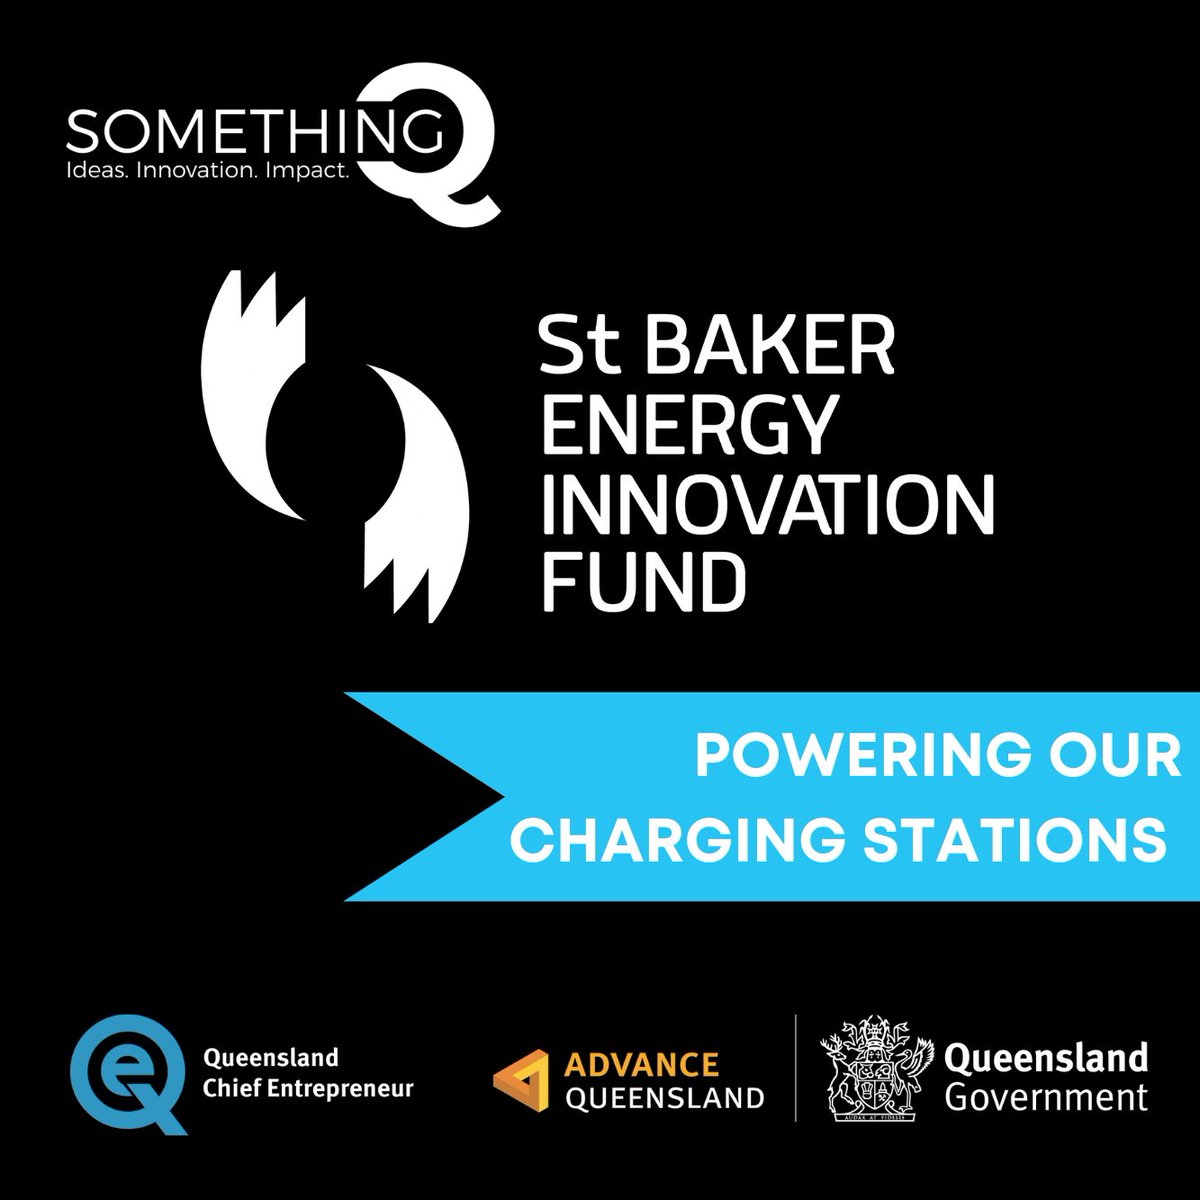 Queensland Chief Entrepreneur welcomes St Baker Energy Fund supporting SomethingQ charging stations. St Baker invests in disruptive energy & e-mobility startups. Info: stbenergy.com.au. SomethingQ, last tickets: bit.ly/somethingqtick… #SQ23 #SomethingQ